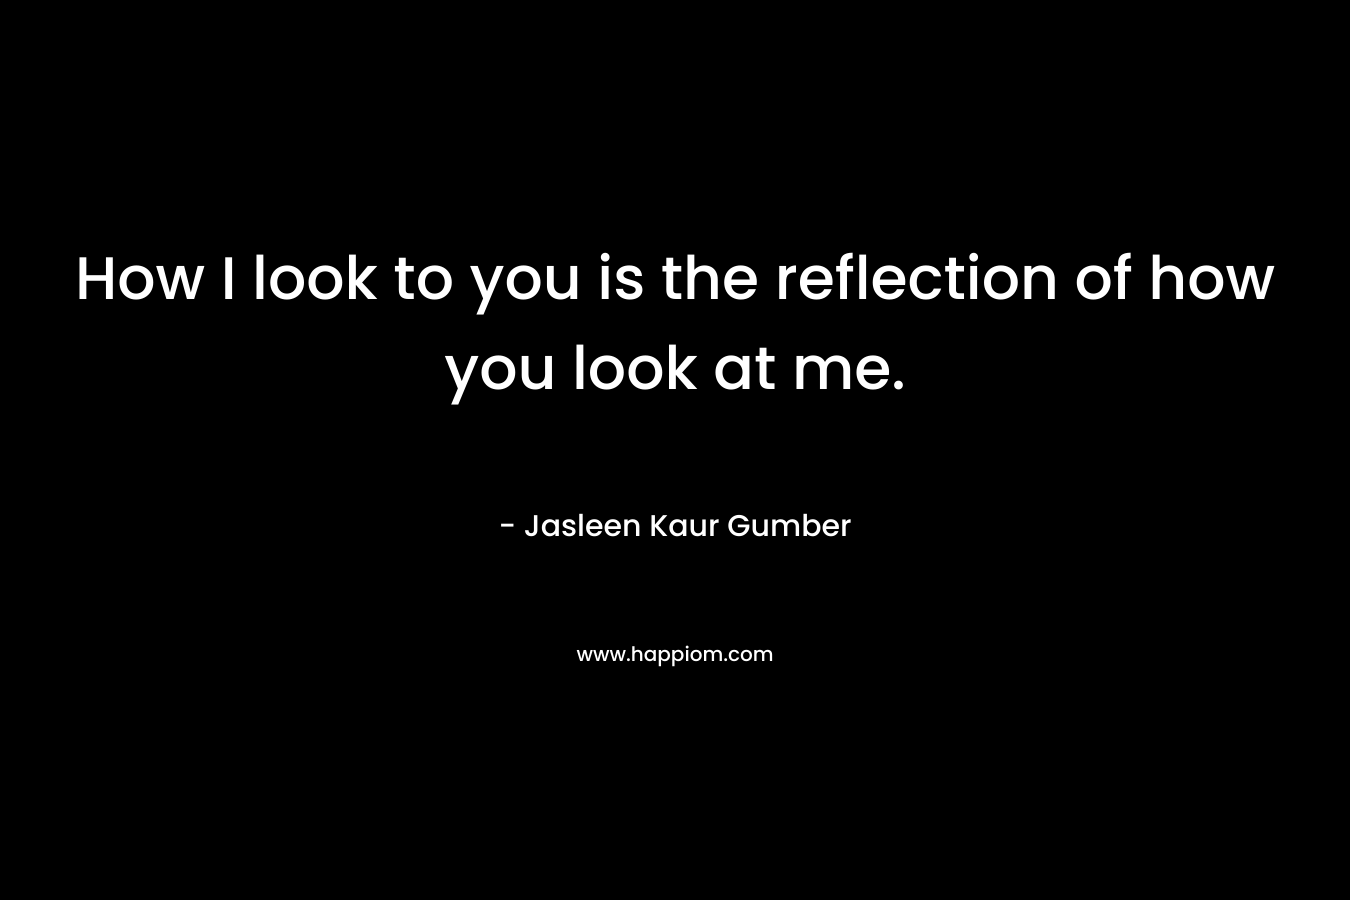 How I look to you is the reflection of how you look at me.